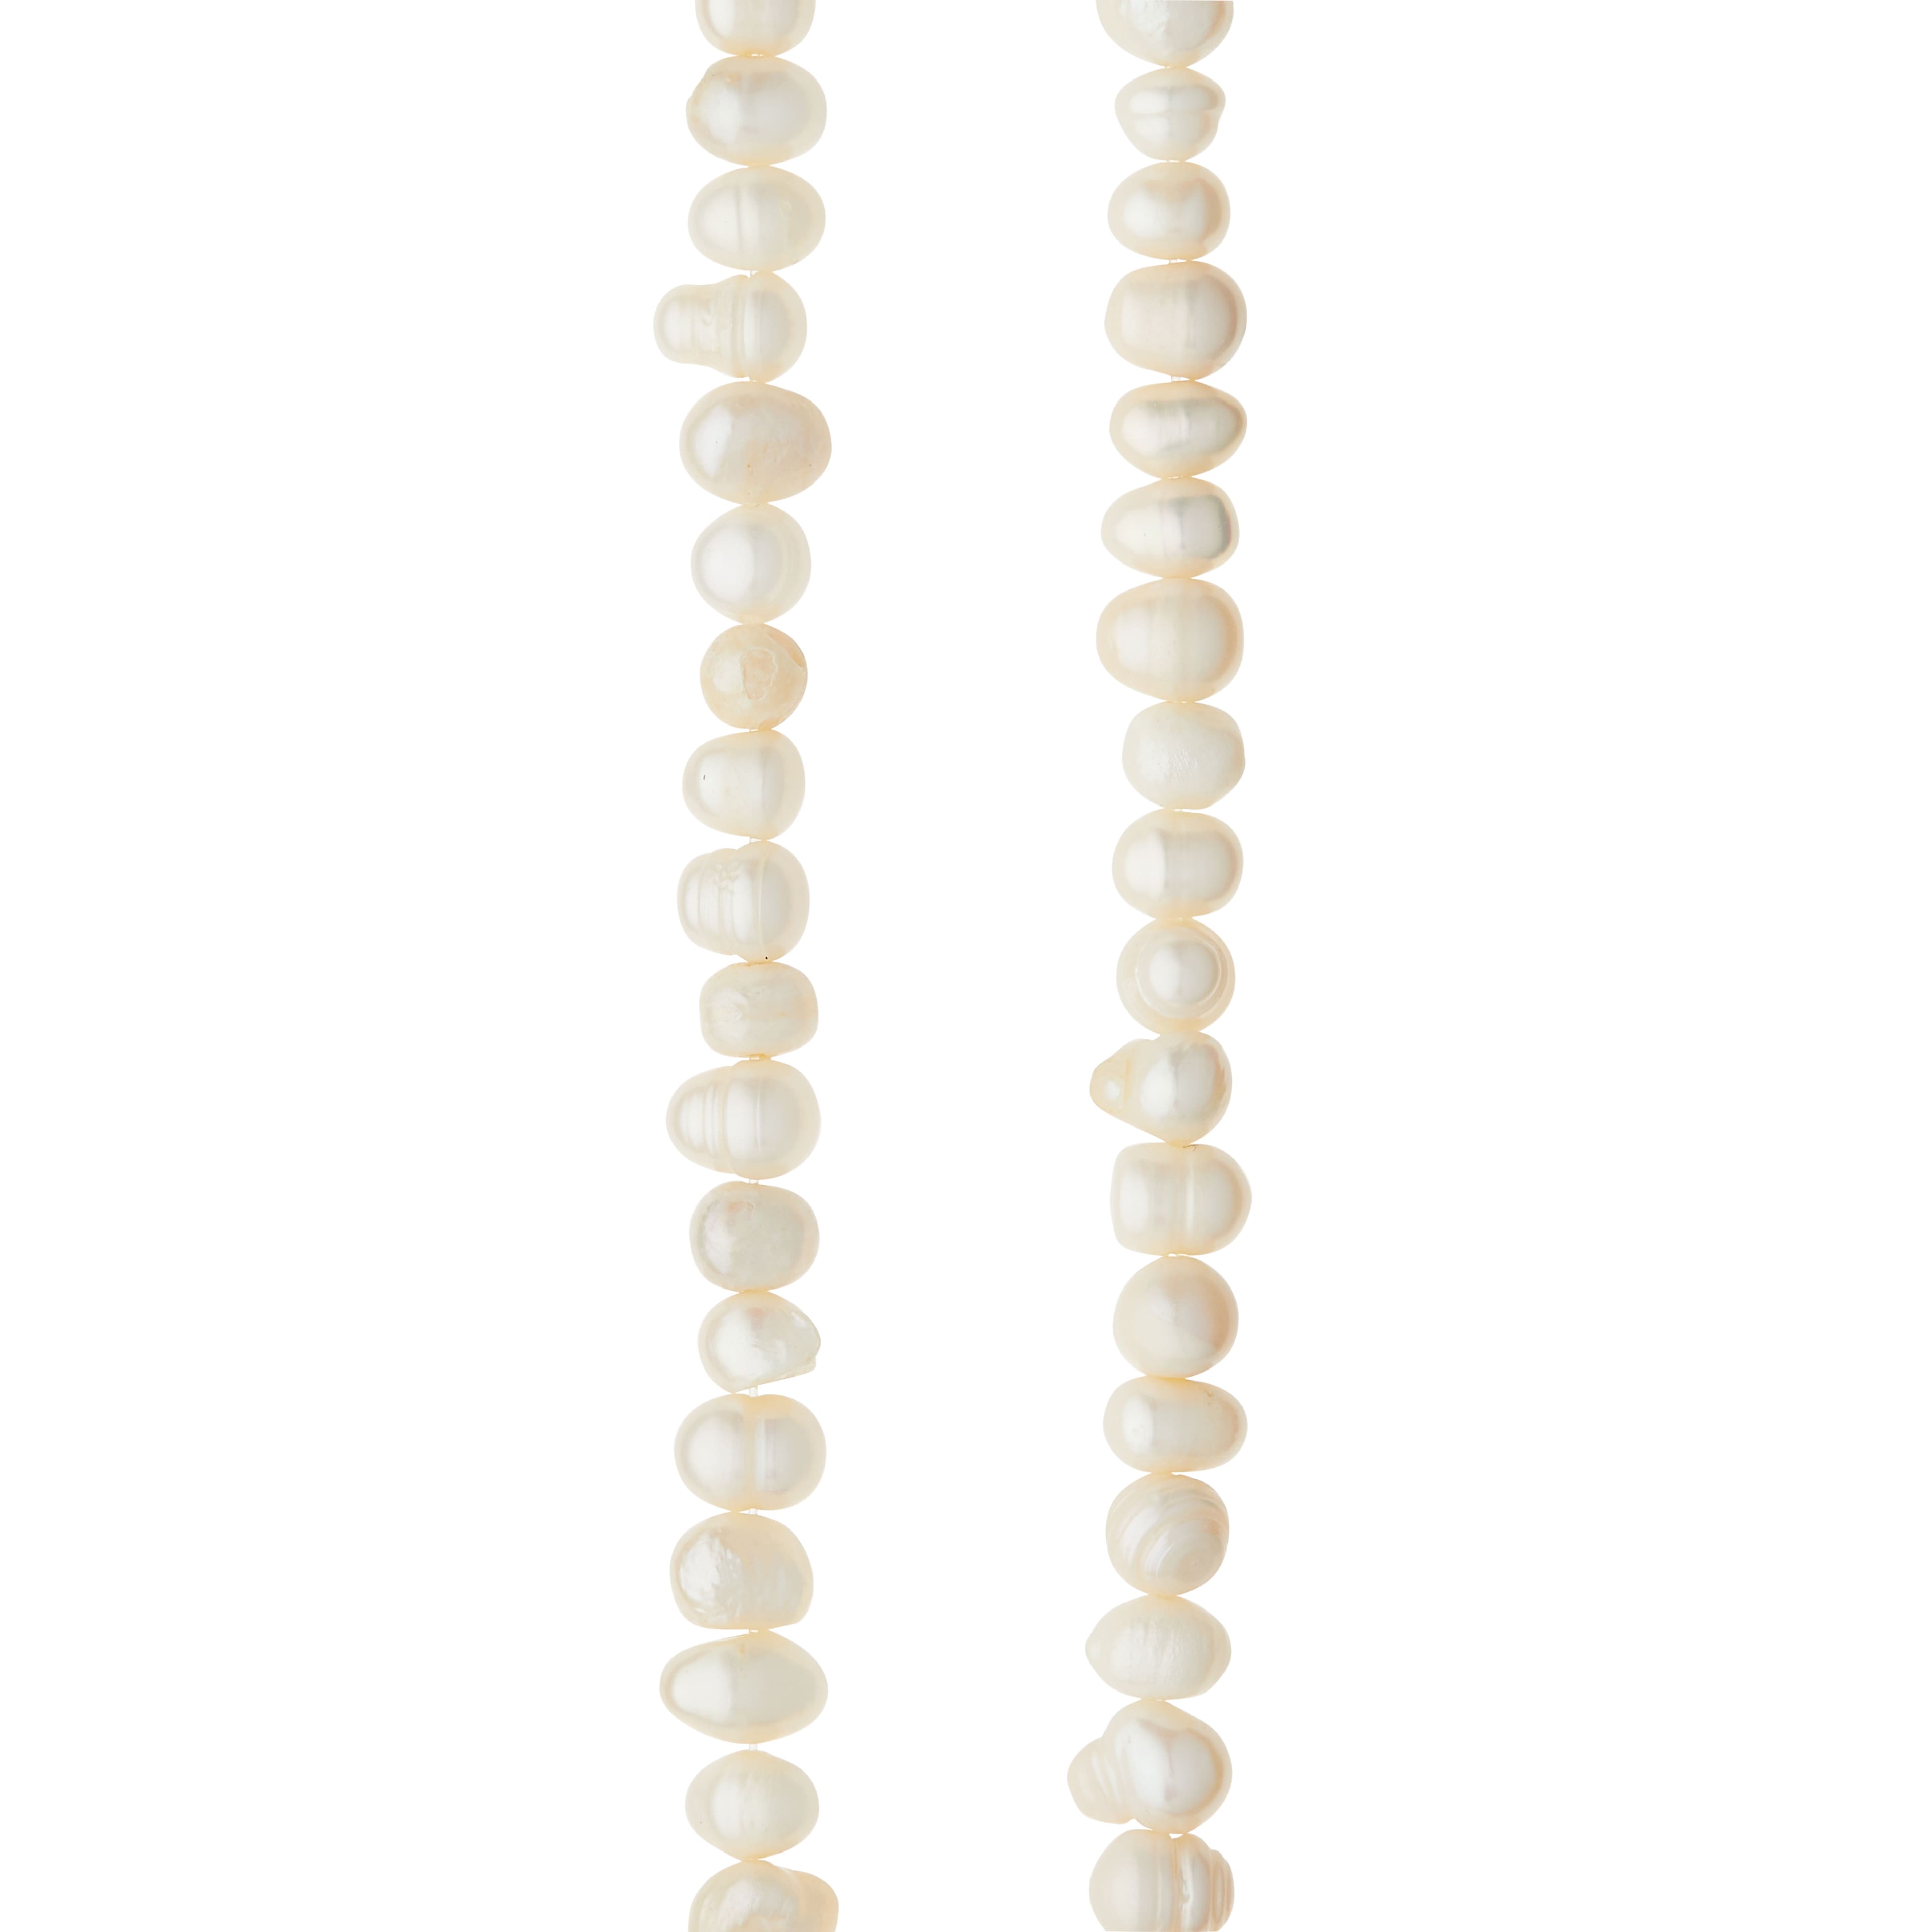 Bead Gallery White Pearl Potato Beads - 9mm - Each